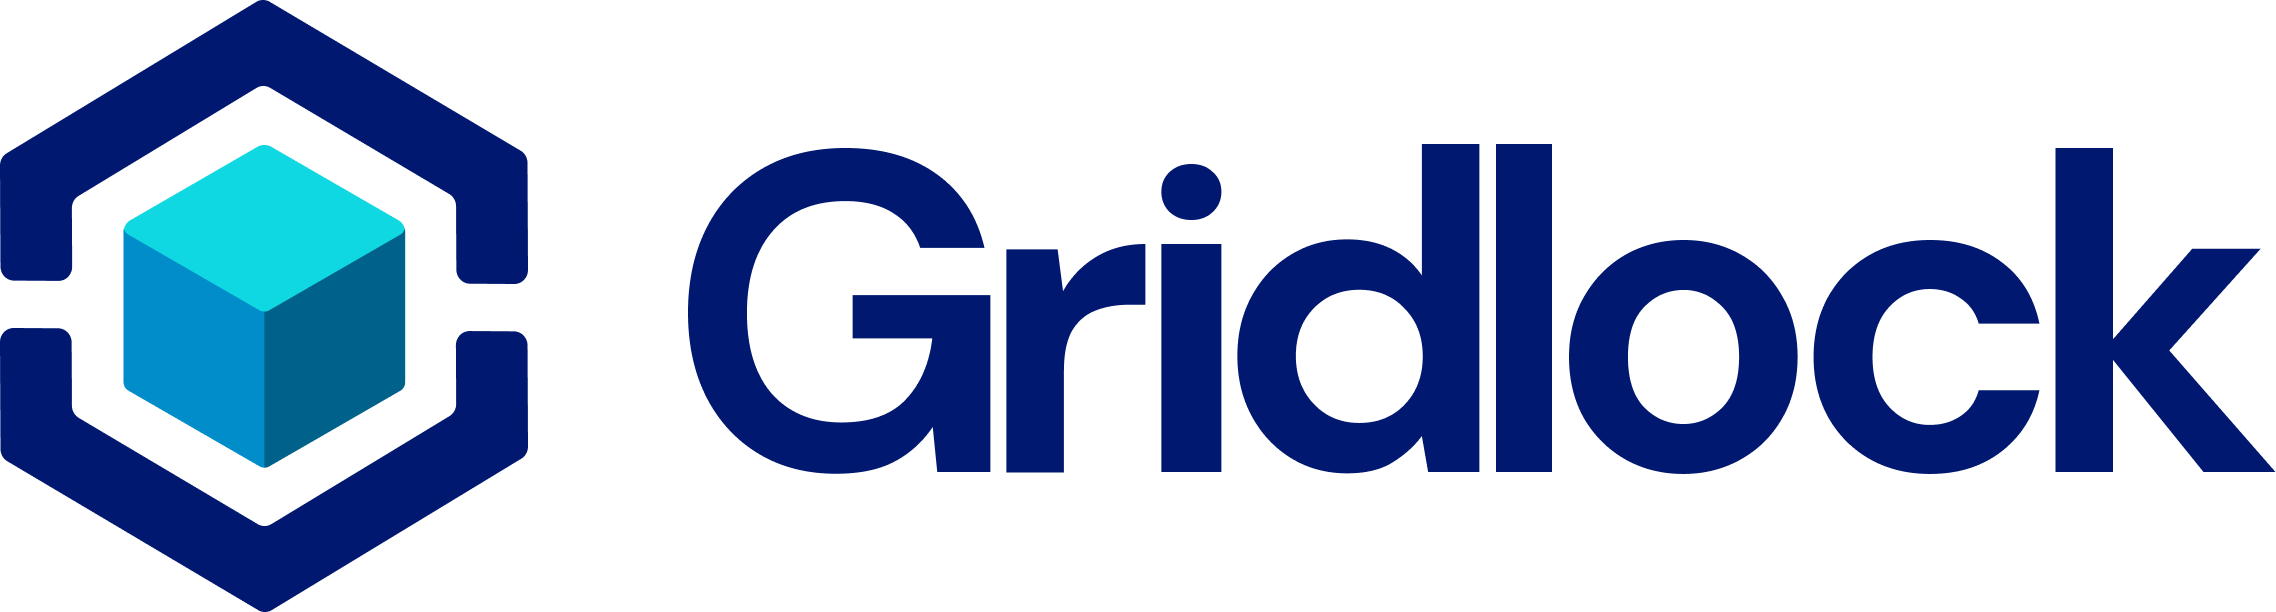 , Gridlock, Inc. Launches Revolutionary Crypto and NFT Wallet with Best In Class Security for Traditional Finance and Crypto Investors Alike